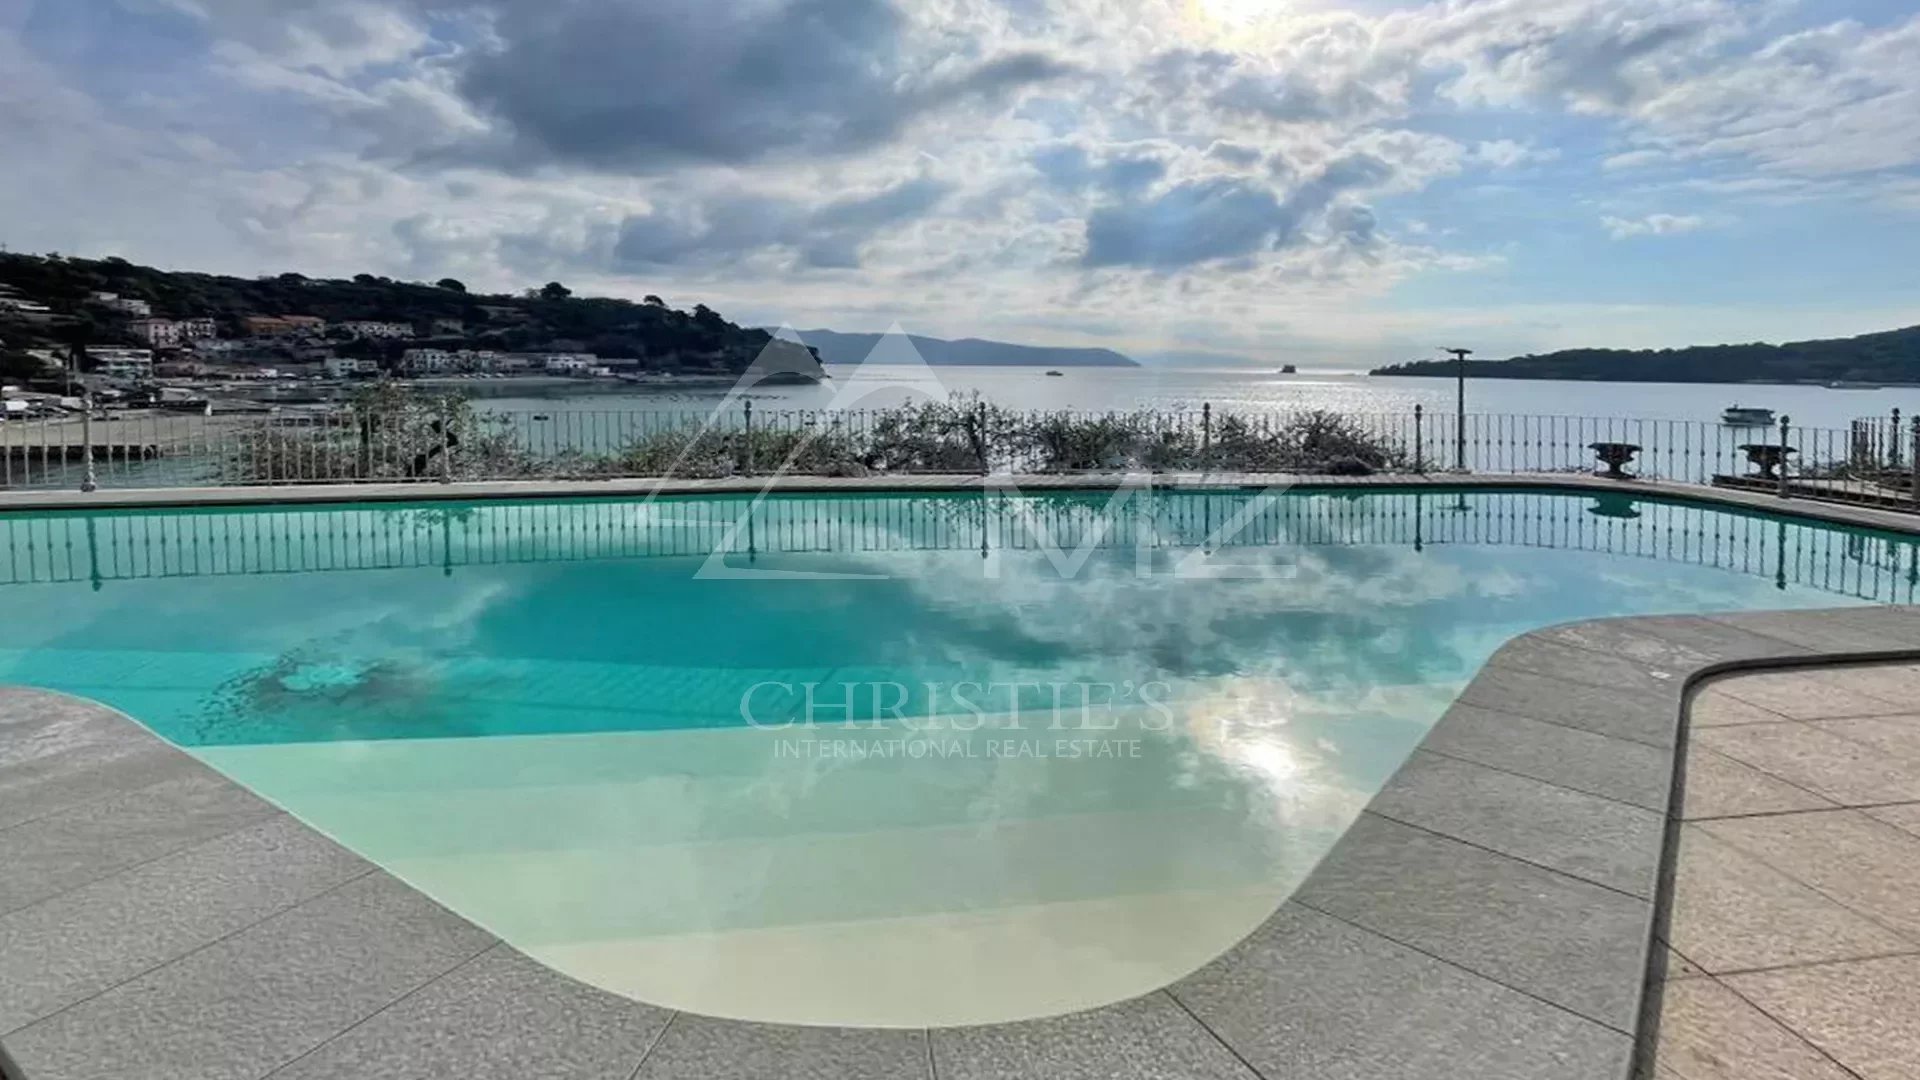 Prestigious historic villa with outbuildings, swimming pool and parking spaces, on the water in Portovenere